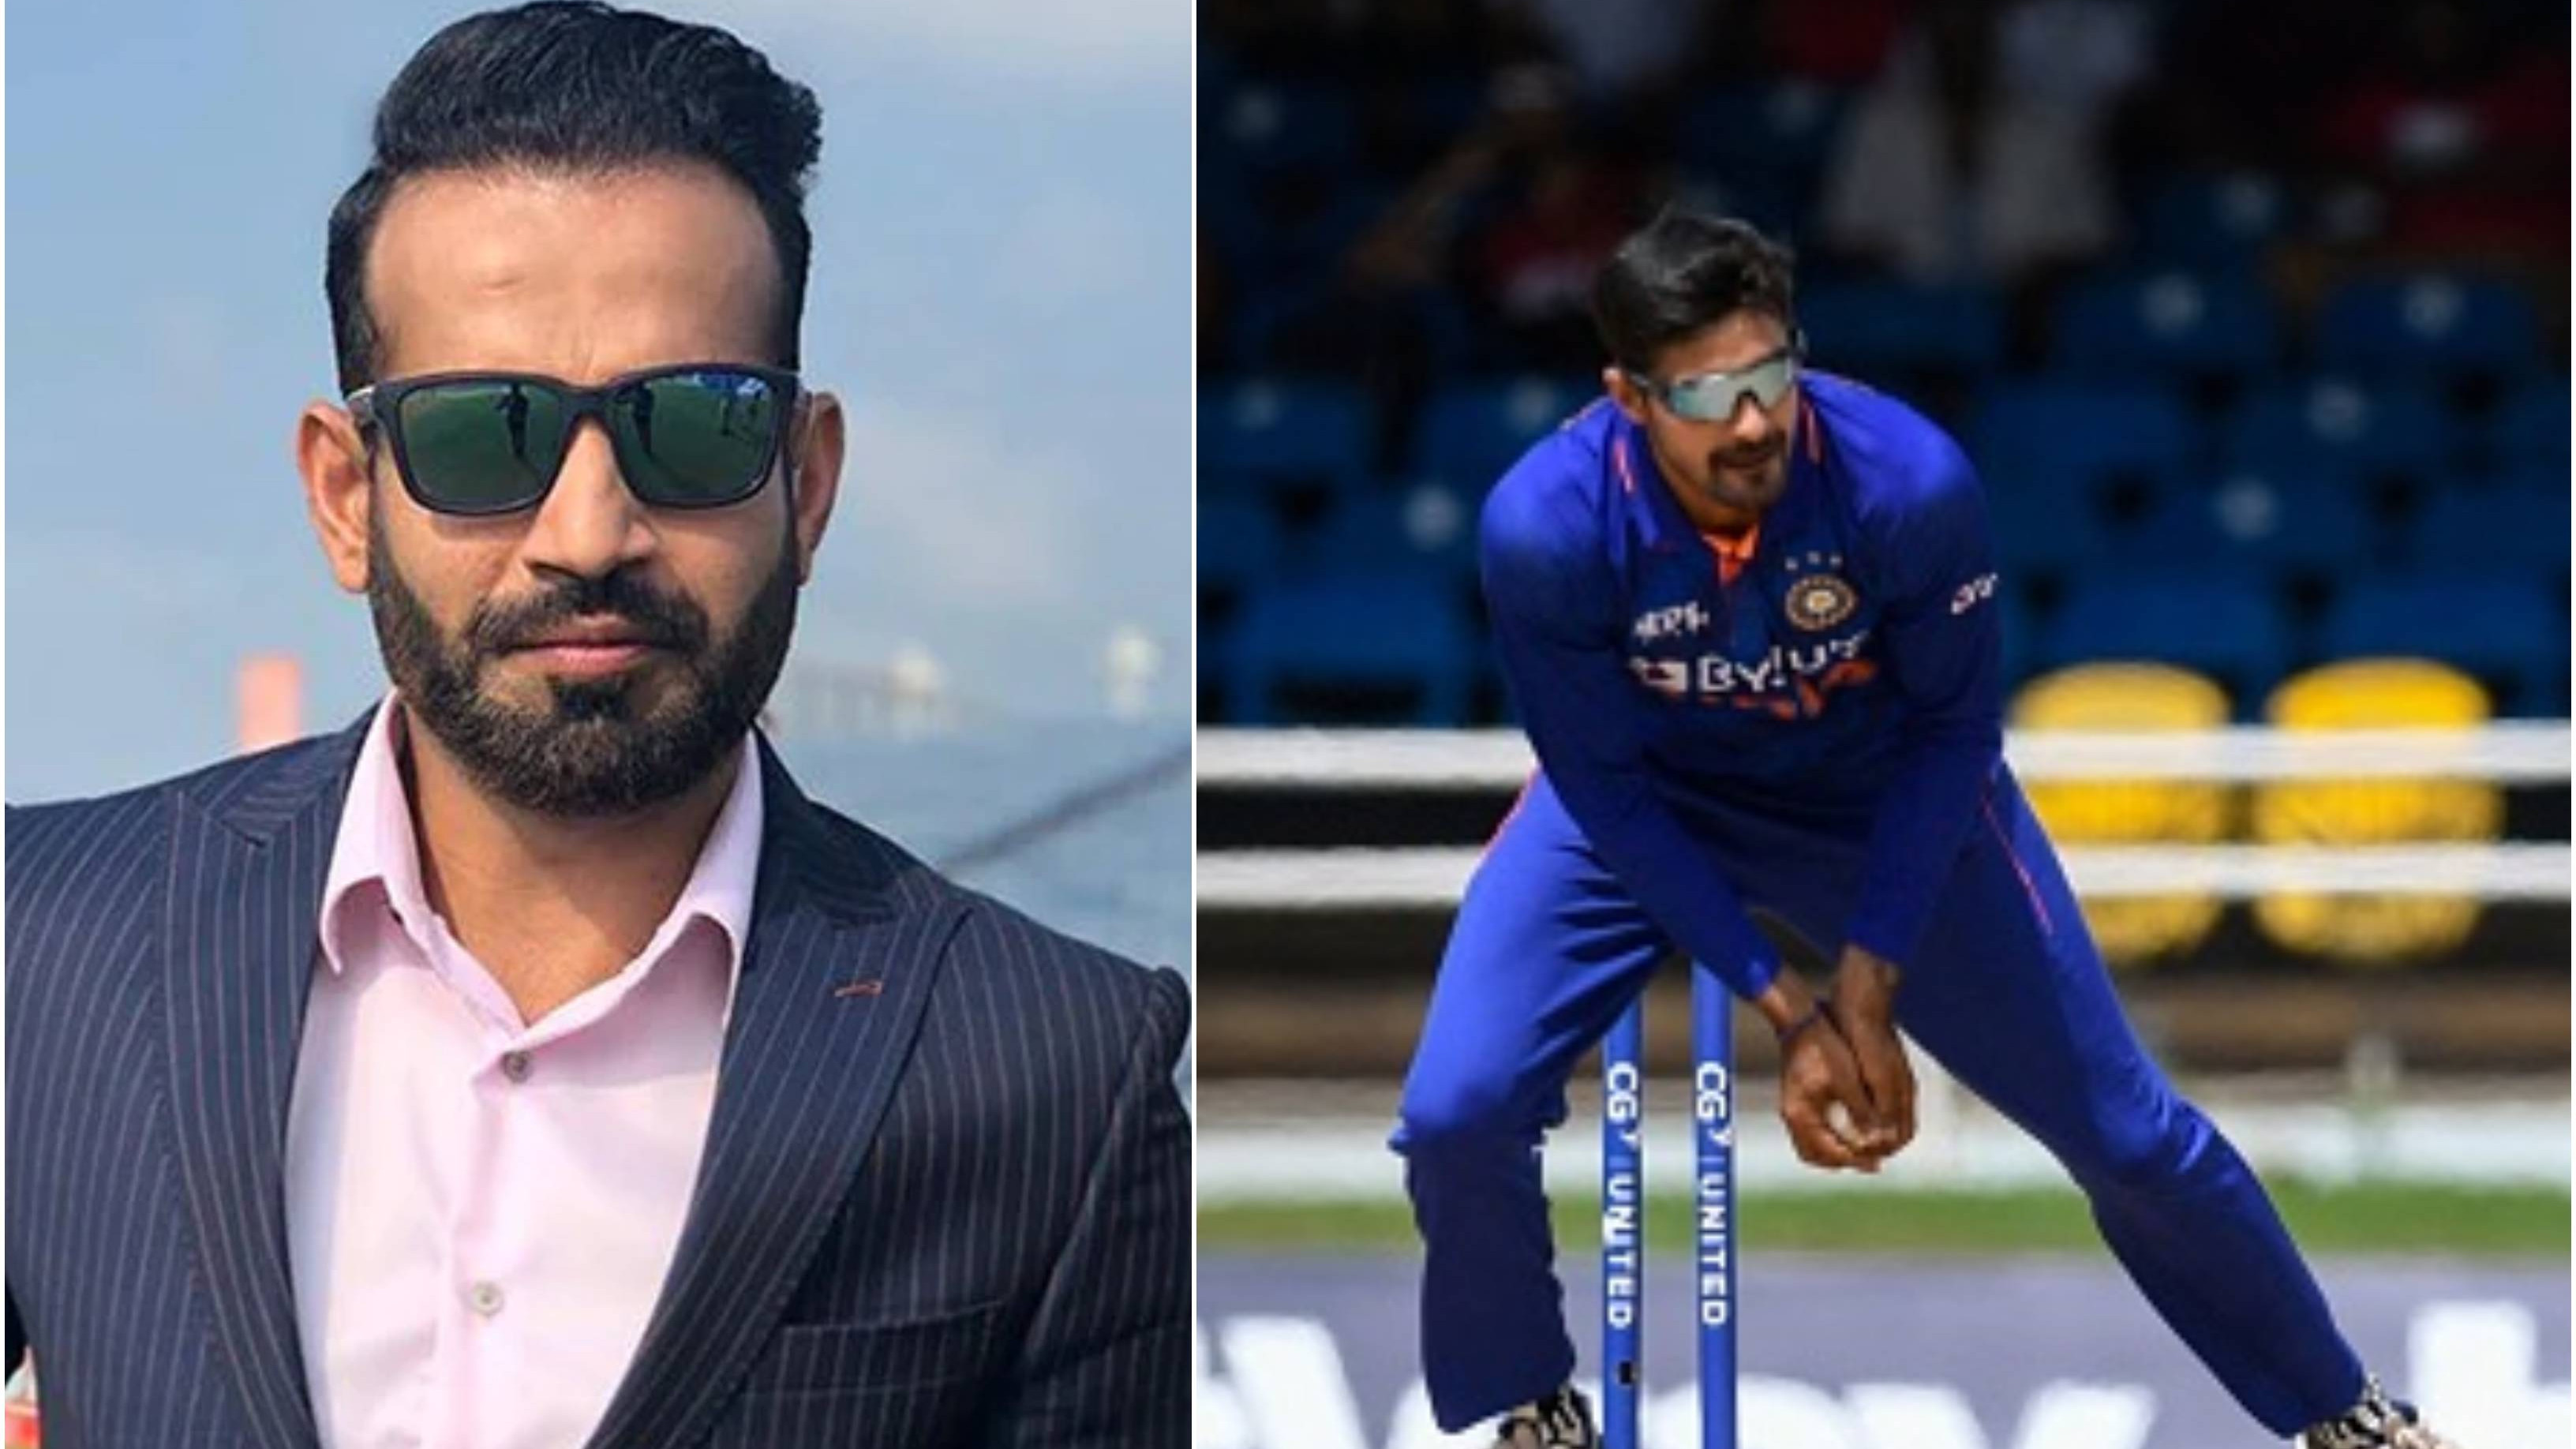 WI v IND 2022: “He’s just 27, has the potential to achieve a lot”, Irfan Pathan on Deepak Hooda